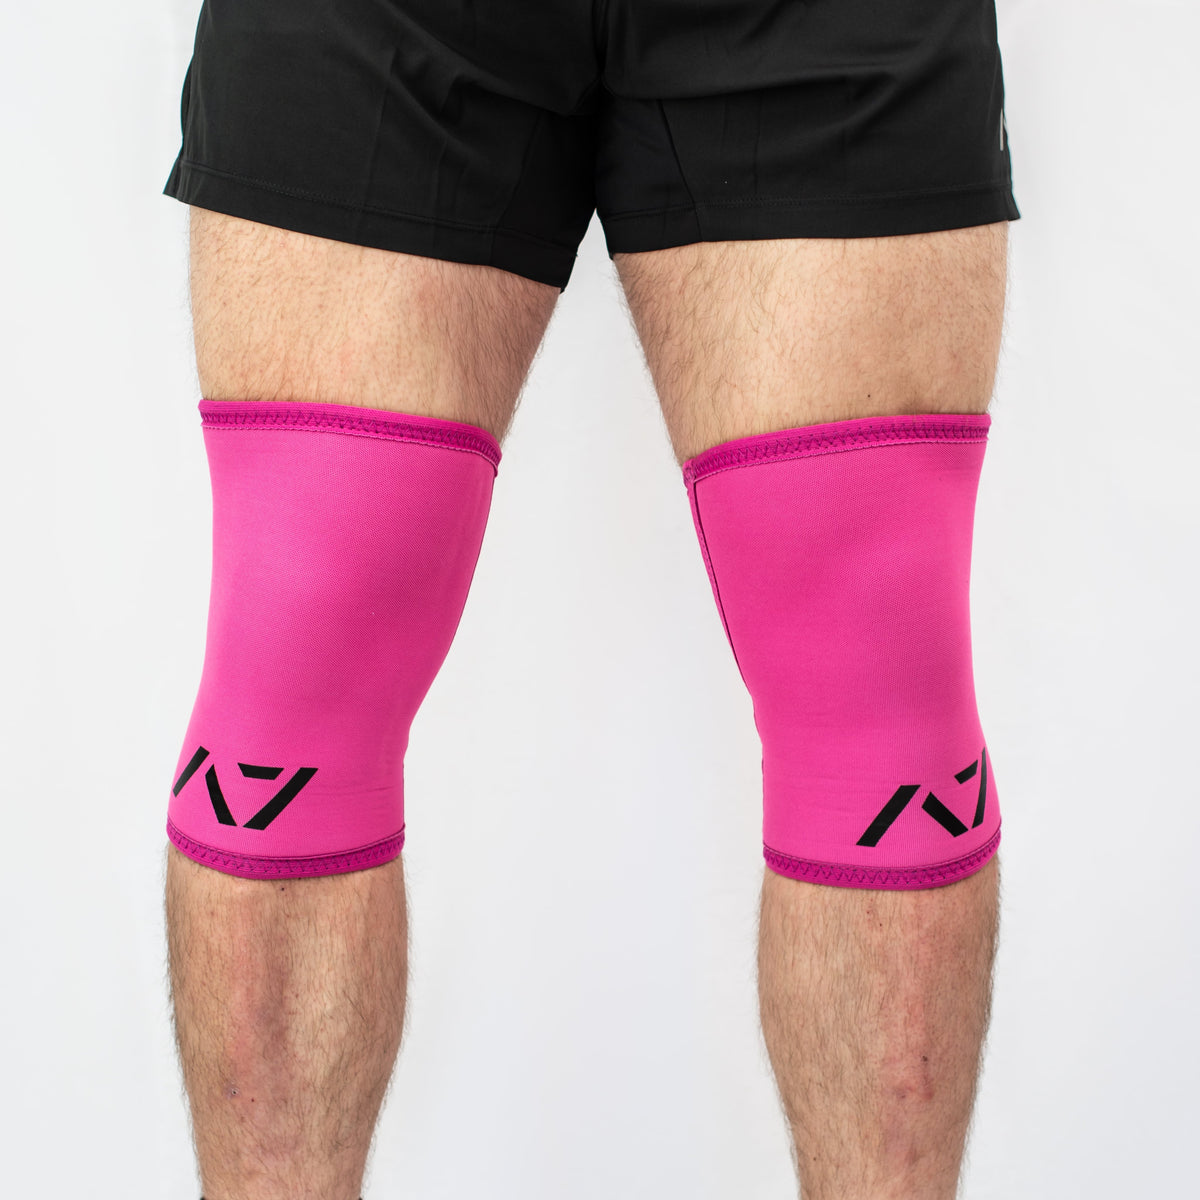 A7 IPF approved Pink CONE knee sleeves are structured with a downward cut panel on the back of the quad and calf to ensure ultimate compression at the knee joint. A7 CONE knee sleeves are IPF approved for use in all powerlifting competitions. A7 cone knee sleeves are made with high quality neoprene and the knee sleeves are sold as a pair. The double seem on the knee sleeves create a greater tension on the knee joint. Available in UK and Europe including France, Italy, Germany, Sweden and Poland